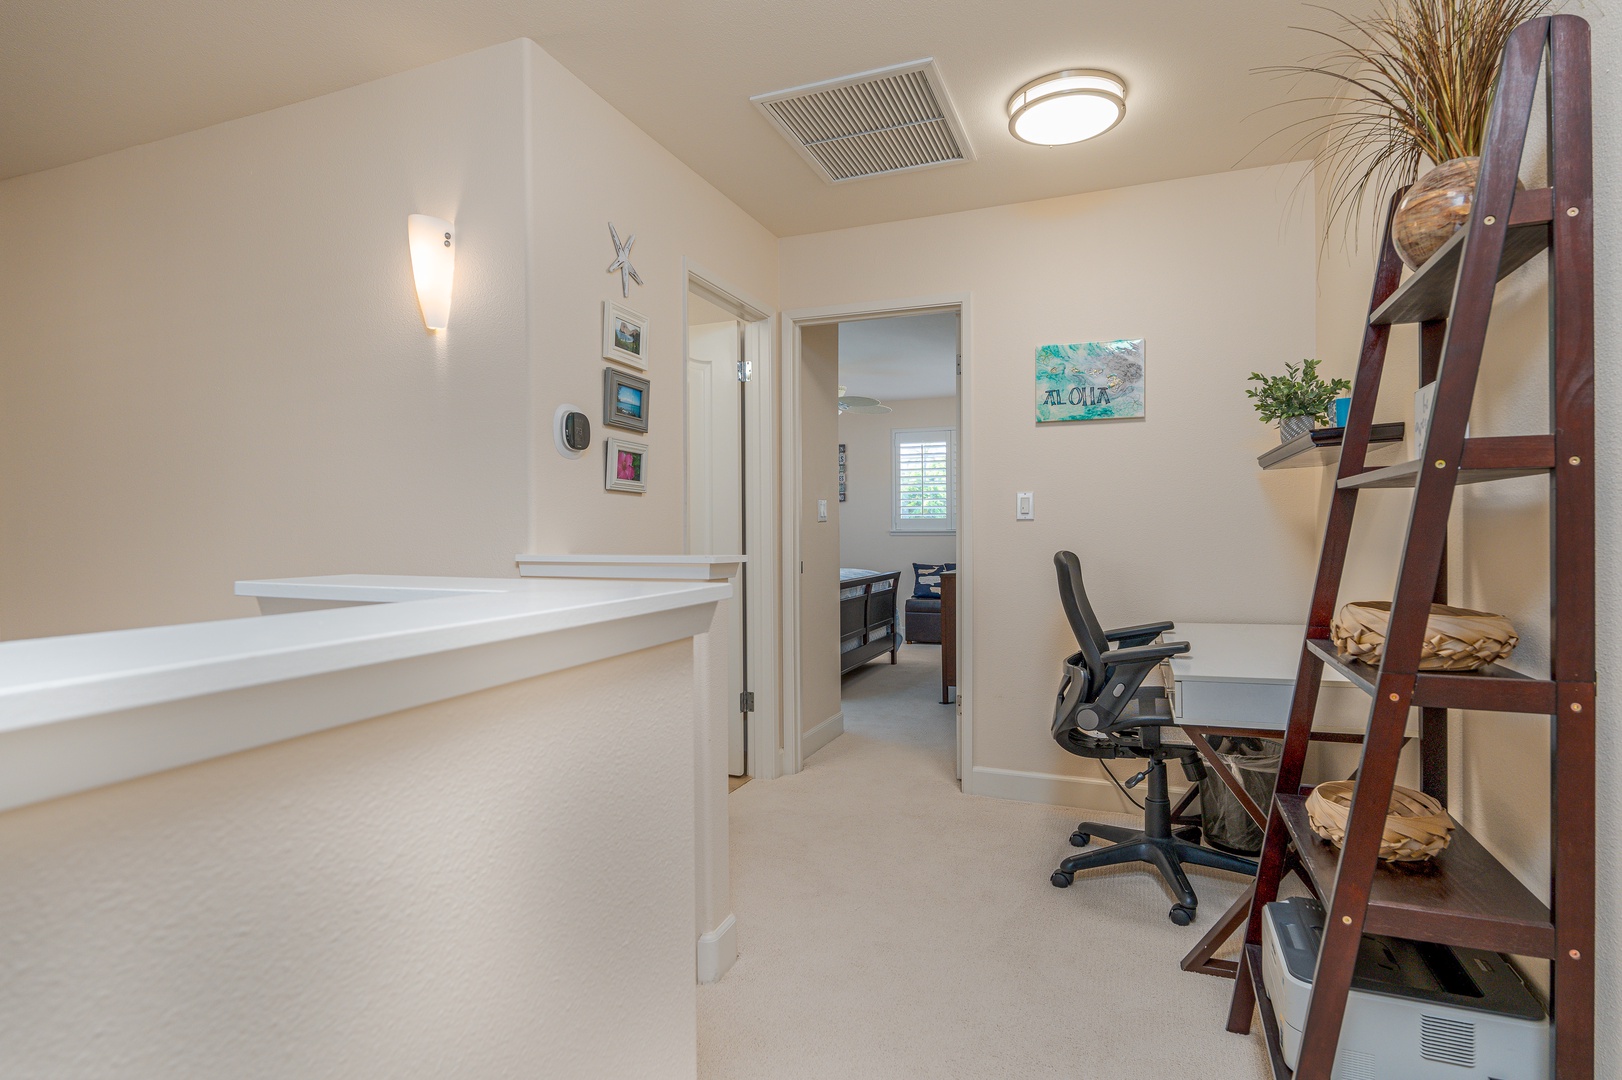 Kapolei Vacation Rentals, Ko Olina Kai 1097C - Your home comes with a dedicated work space to stay productive while on play!